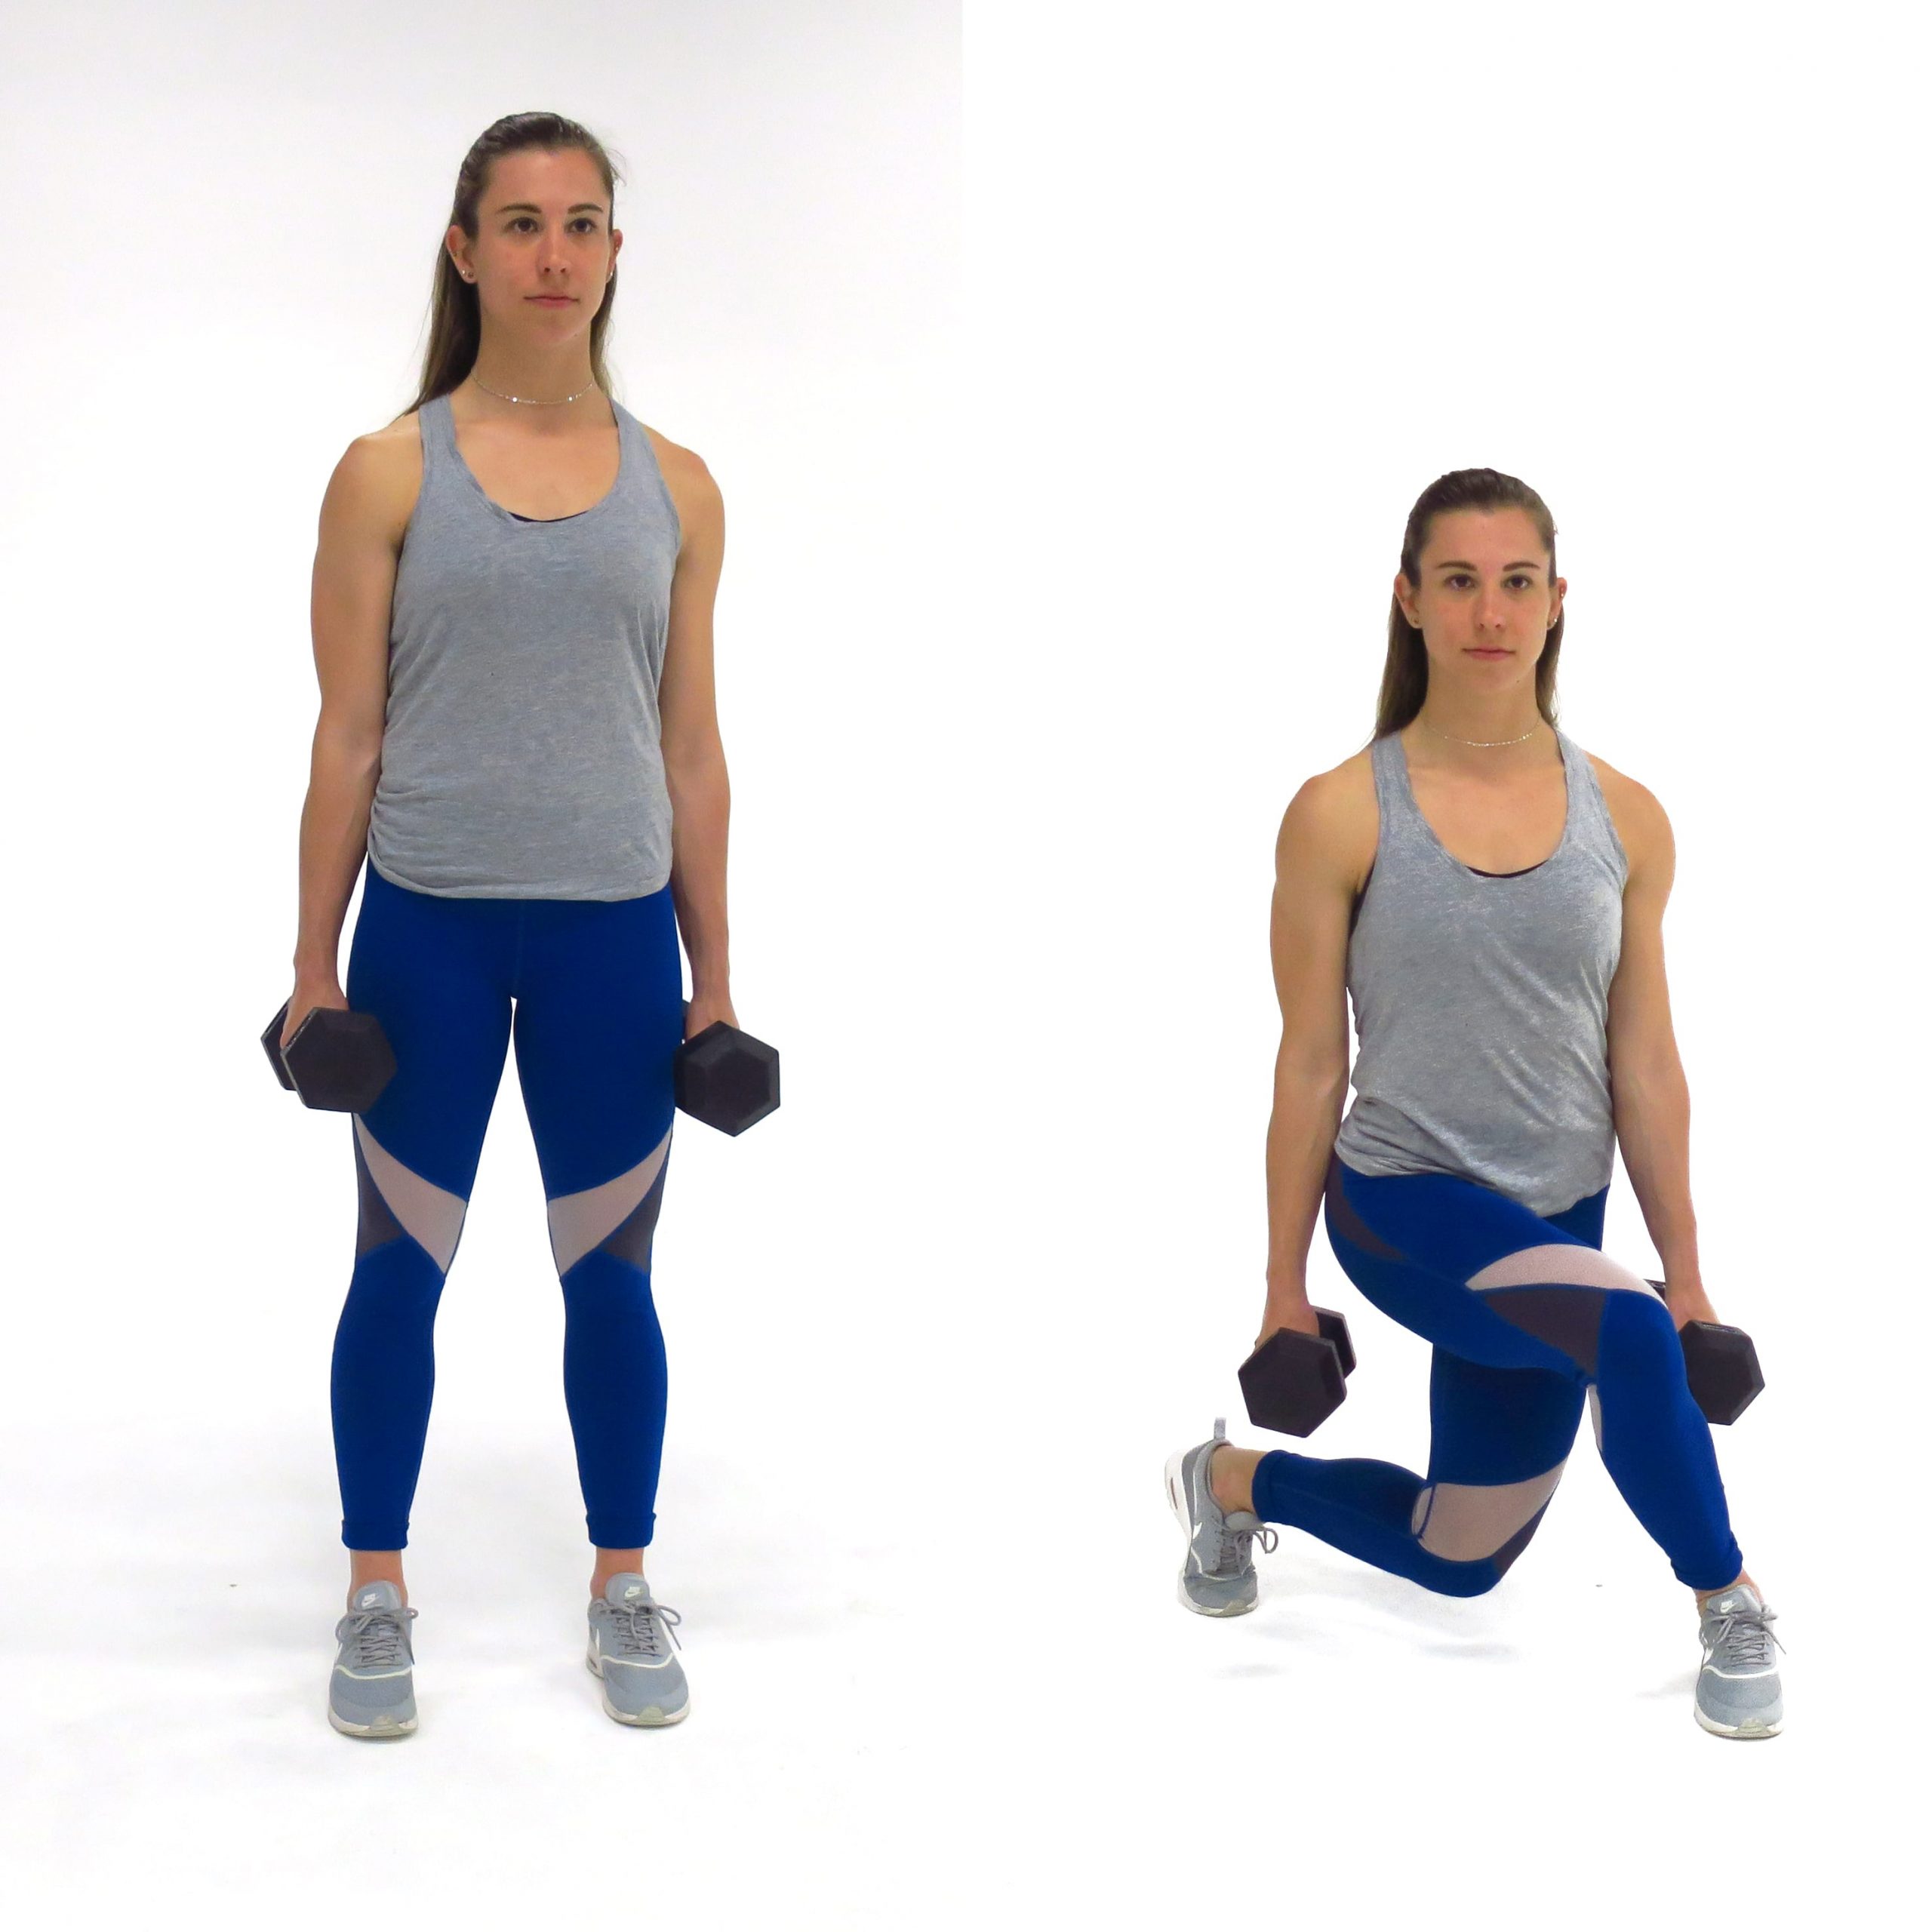 curtsy lunge demo | lunges